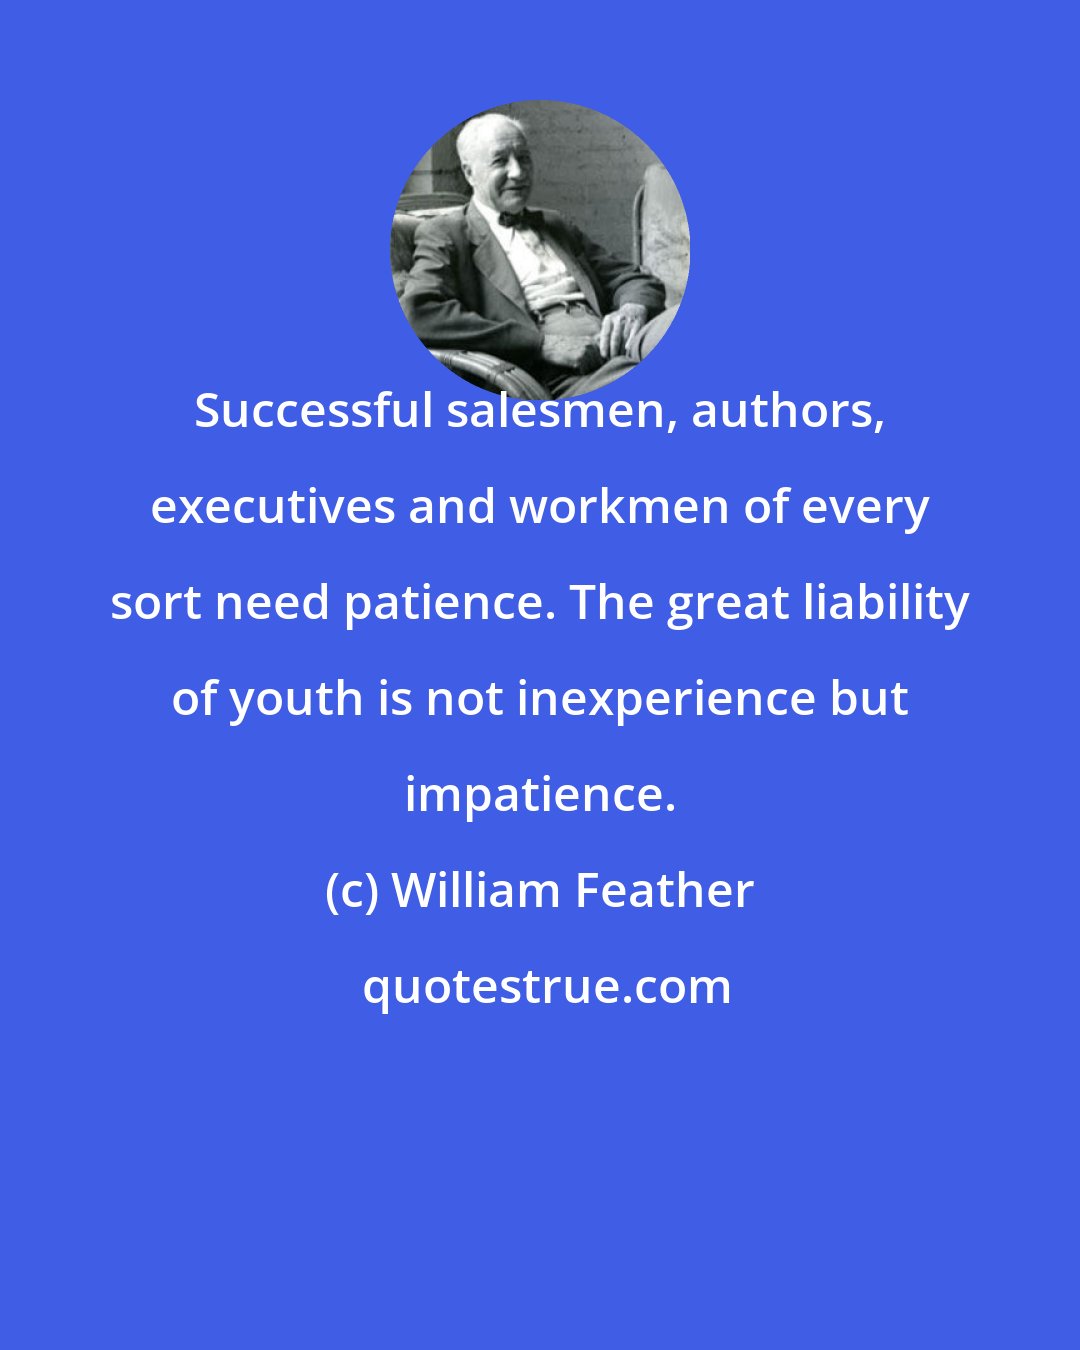 William Feather: Successful salesmen, authors, executives and workmen of every sort need patience. The great liability of youth is not inexperience but impatience.